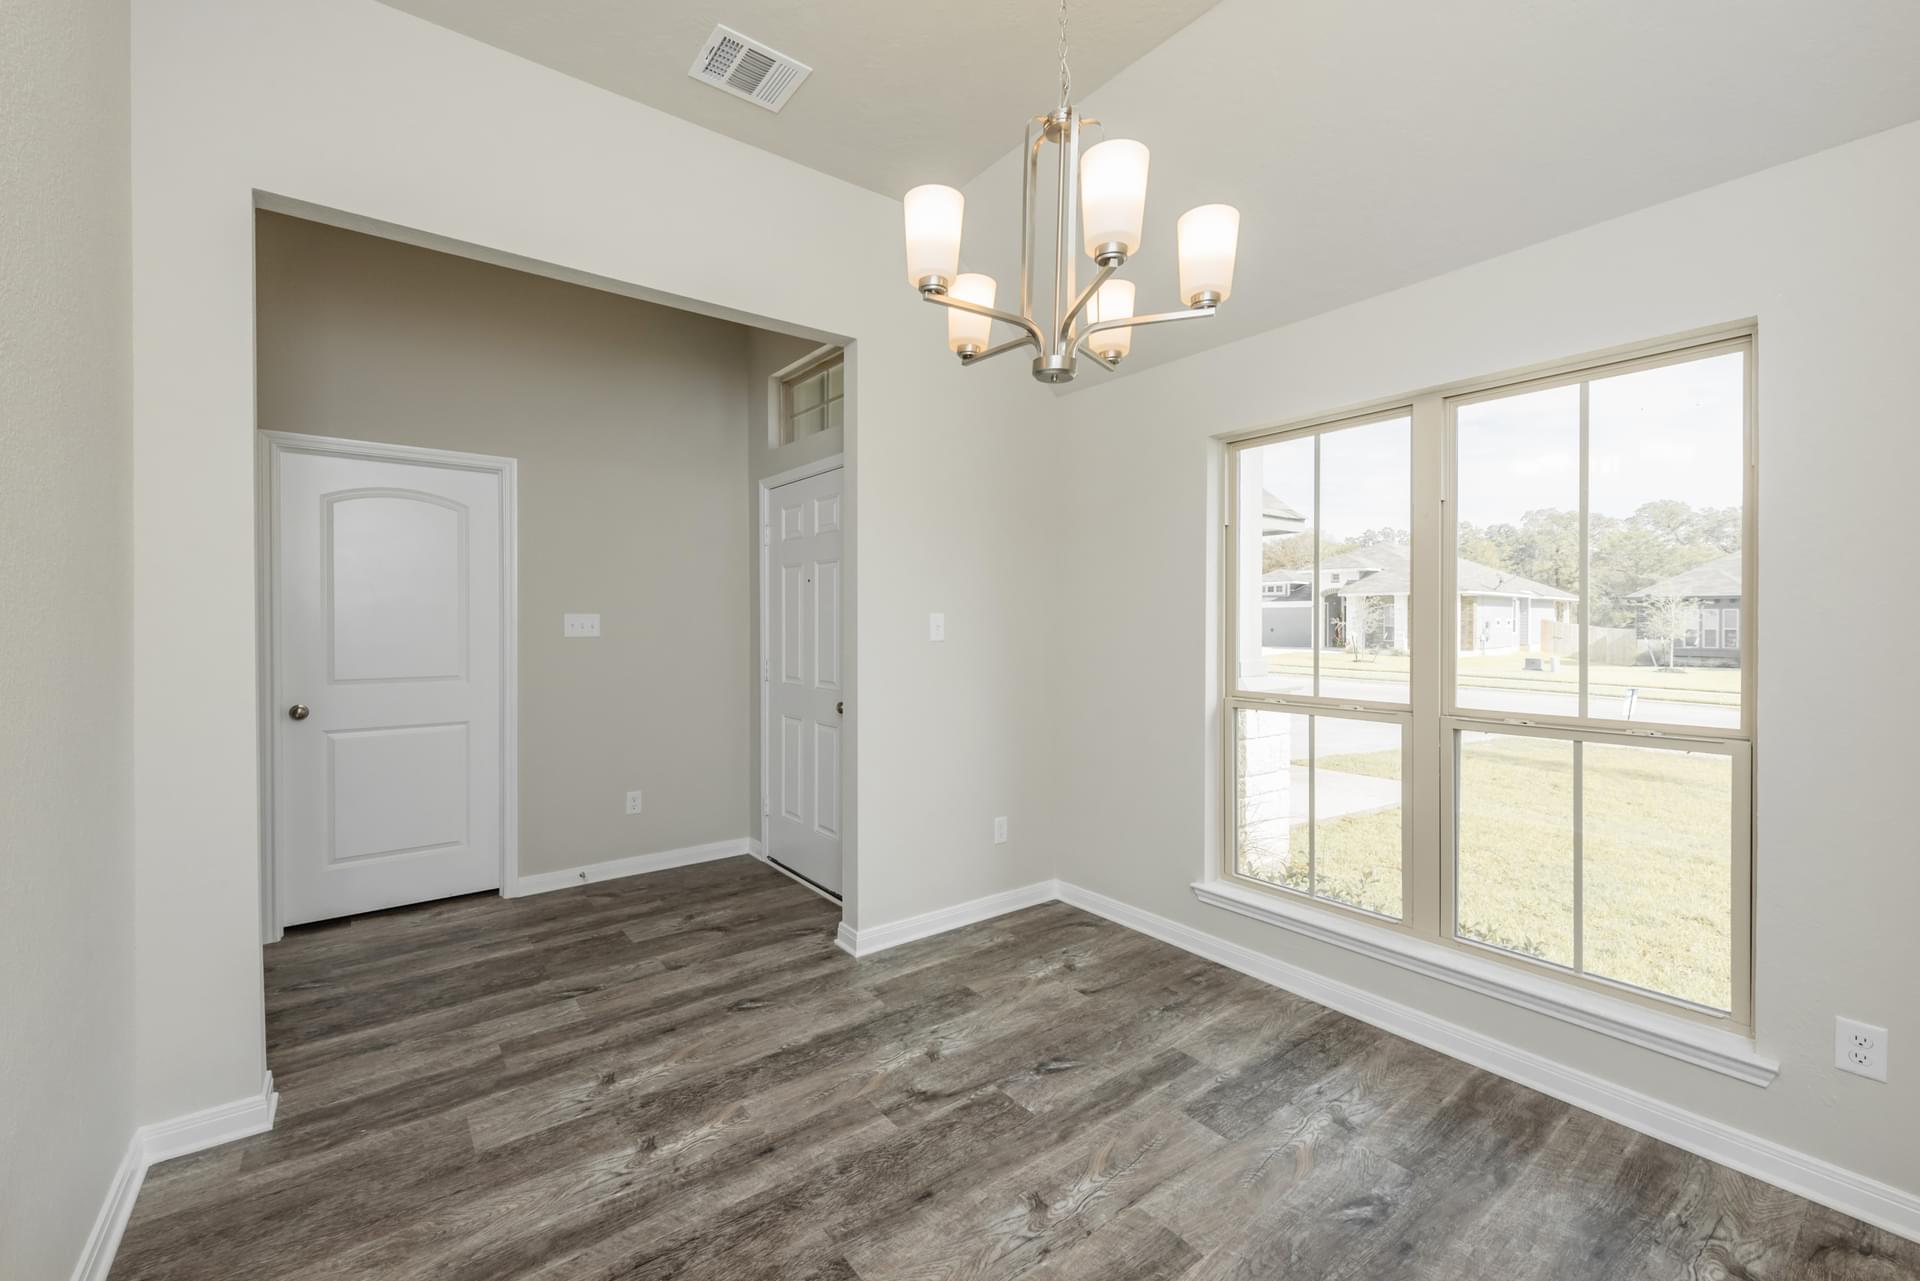 3br New Home in Copperas Cove, TX